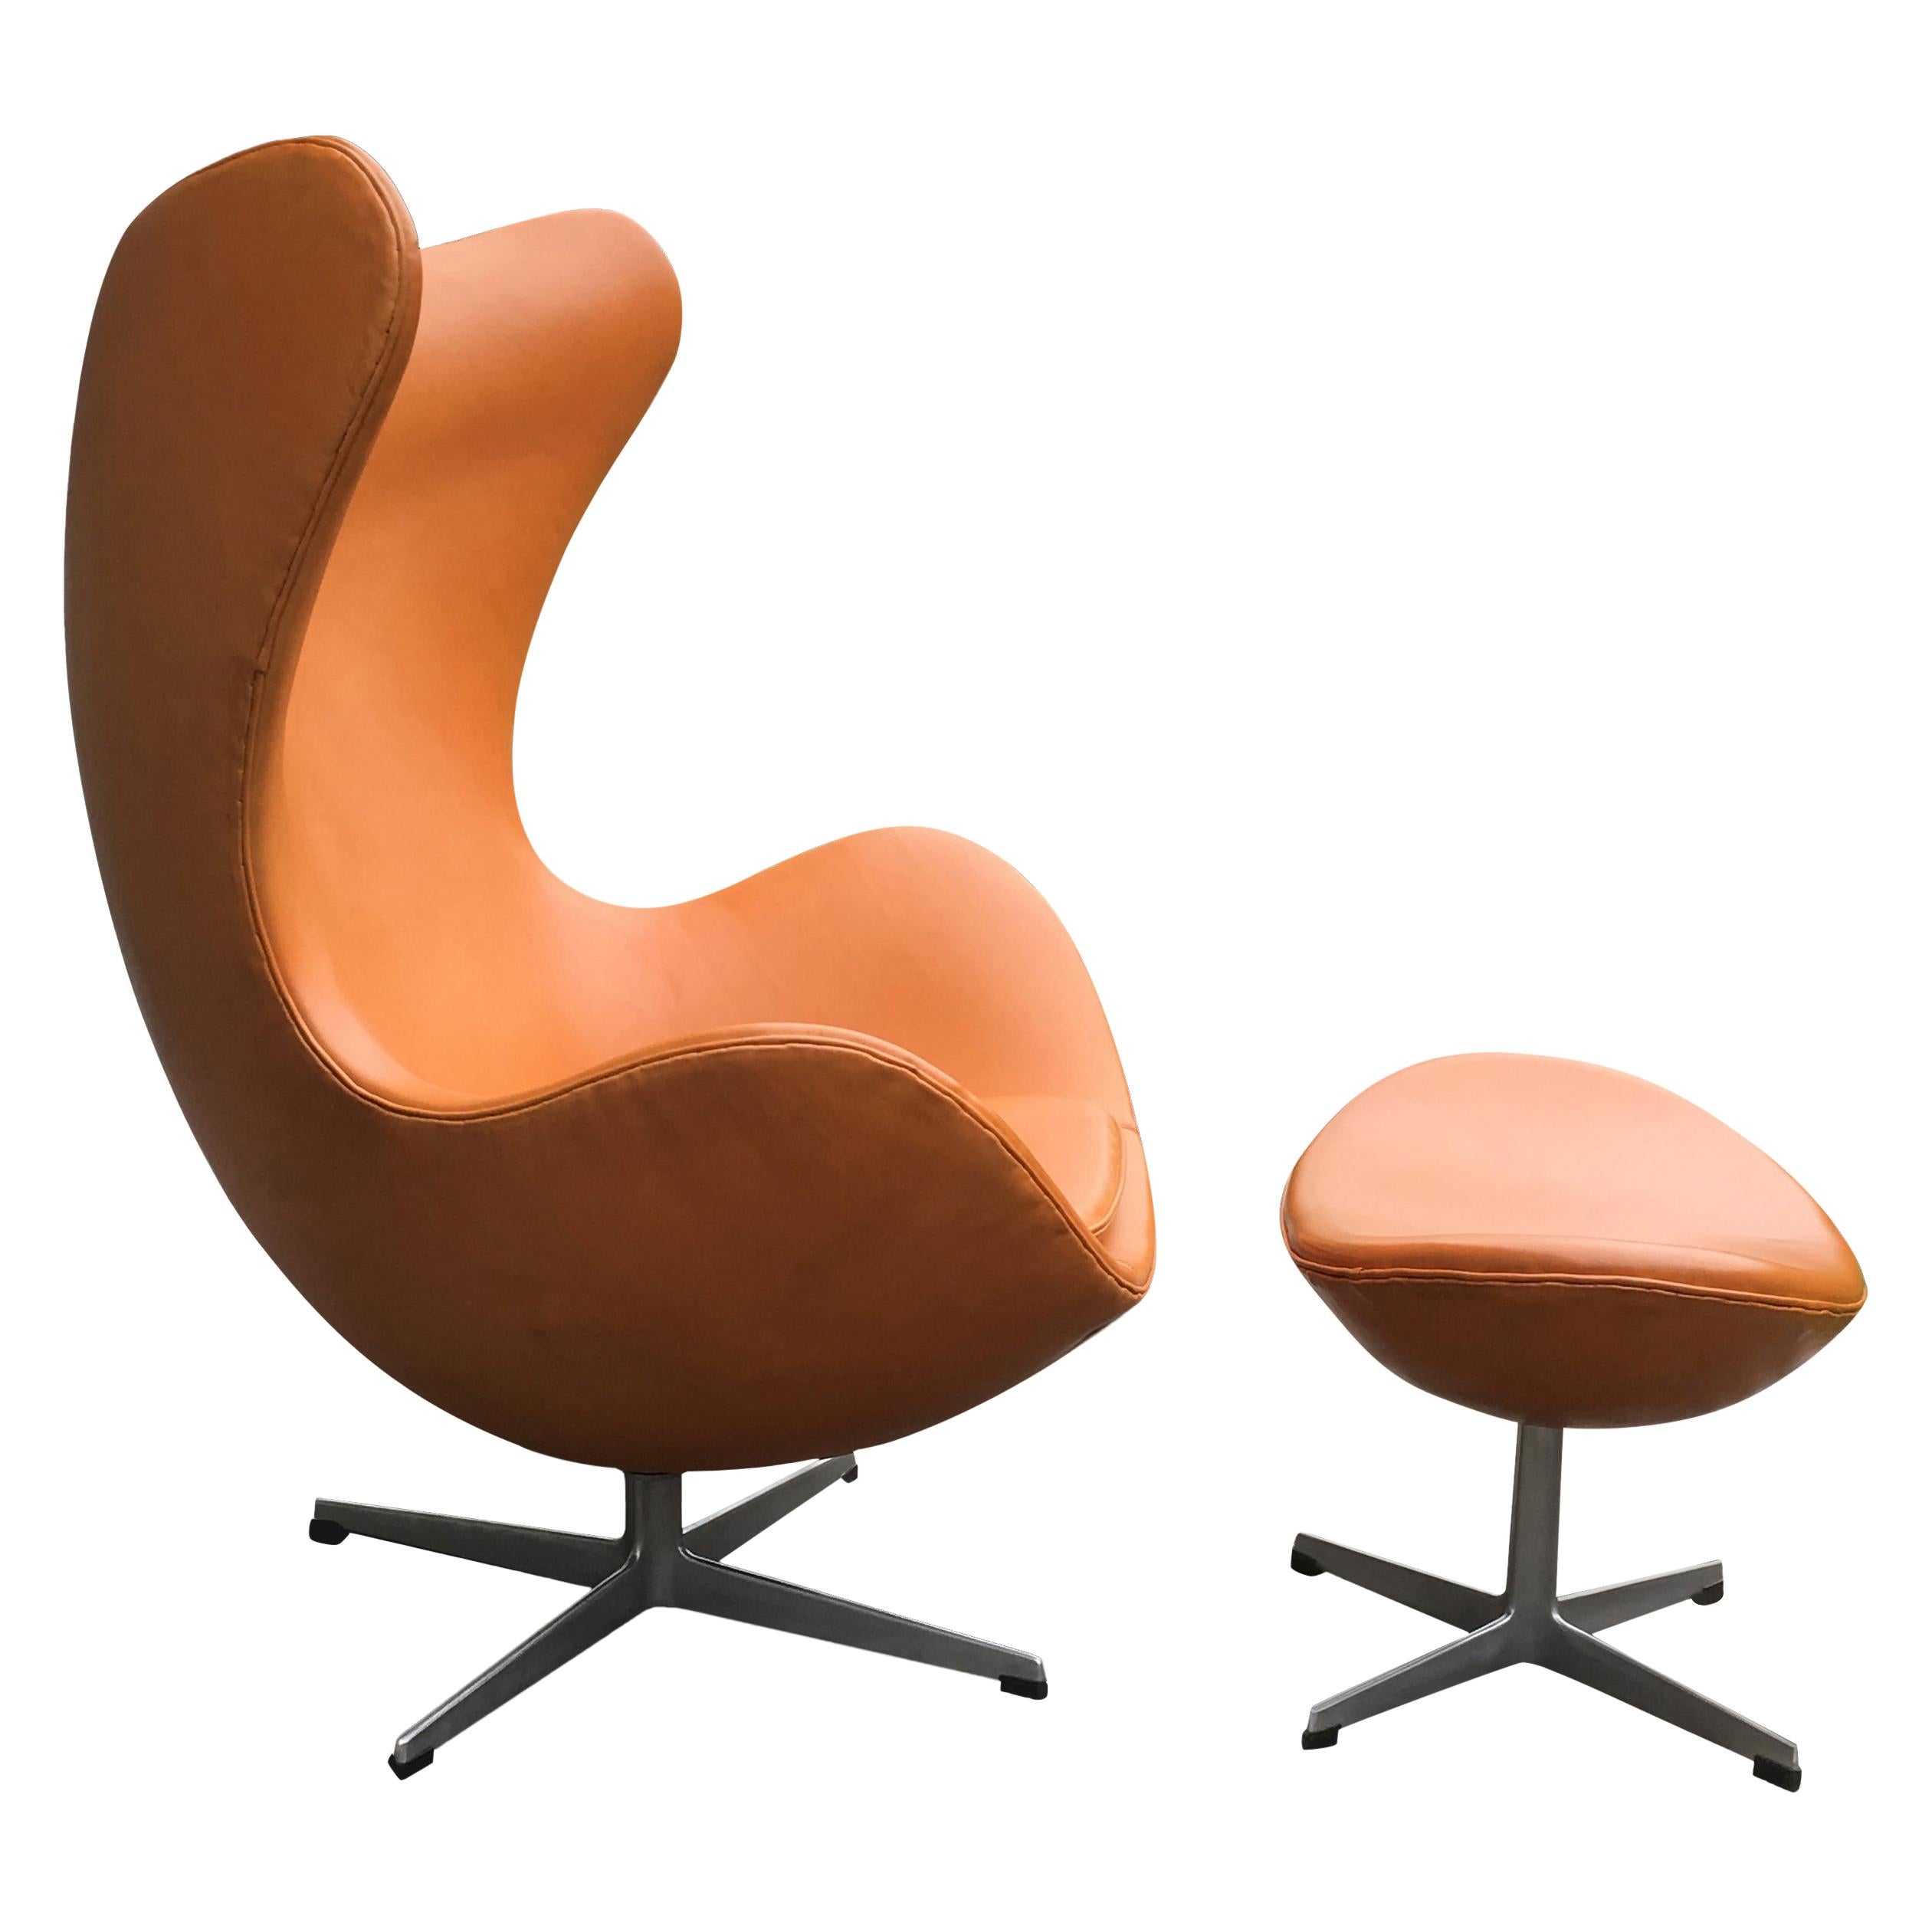 Original Tan Leather Egg Chair and Ottoman by Arne Jacobsen for Fritz Hansen